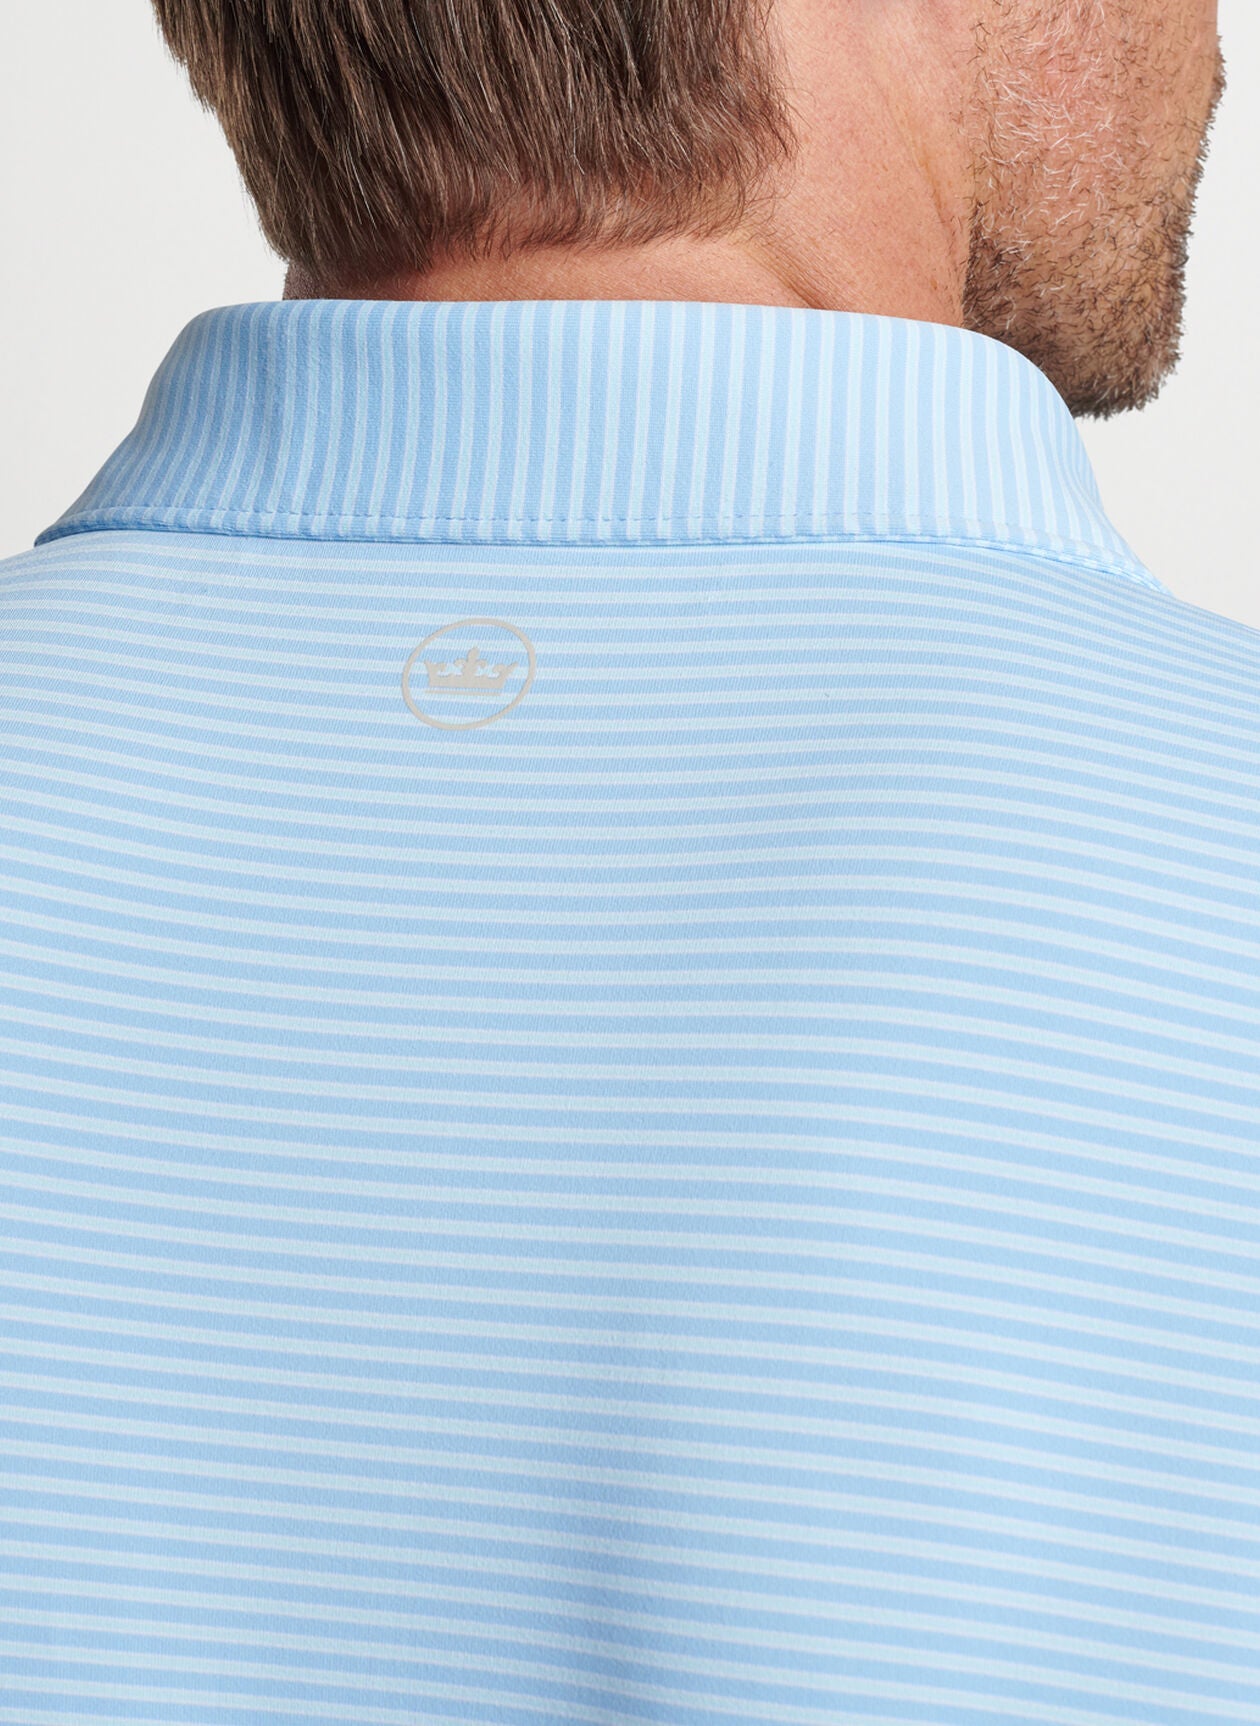 Peter Millar Ambrose Performance Jersey Polo - Blue Frost